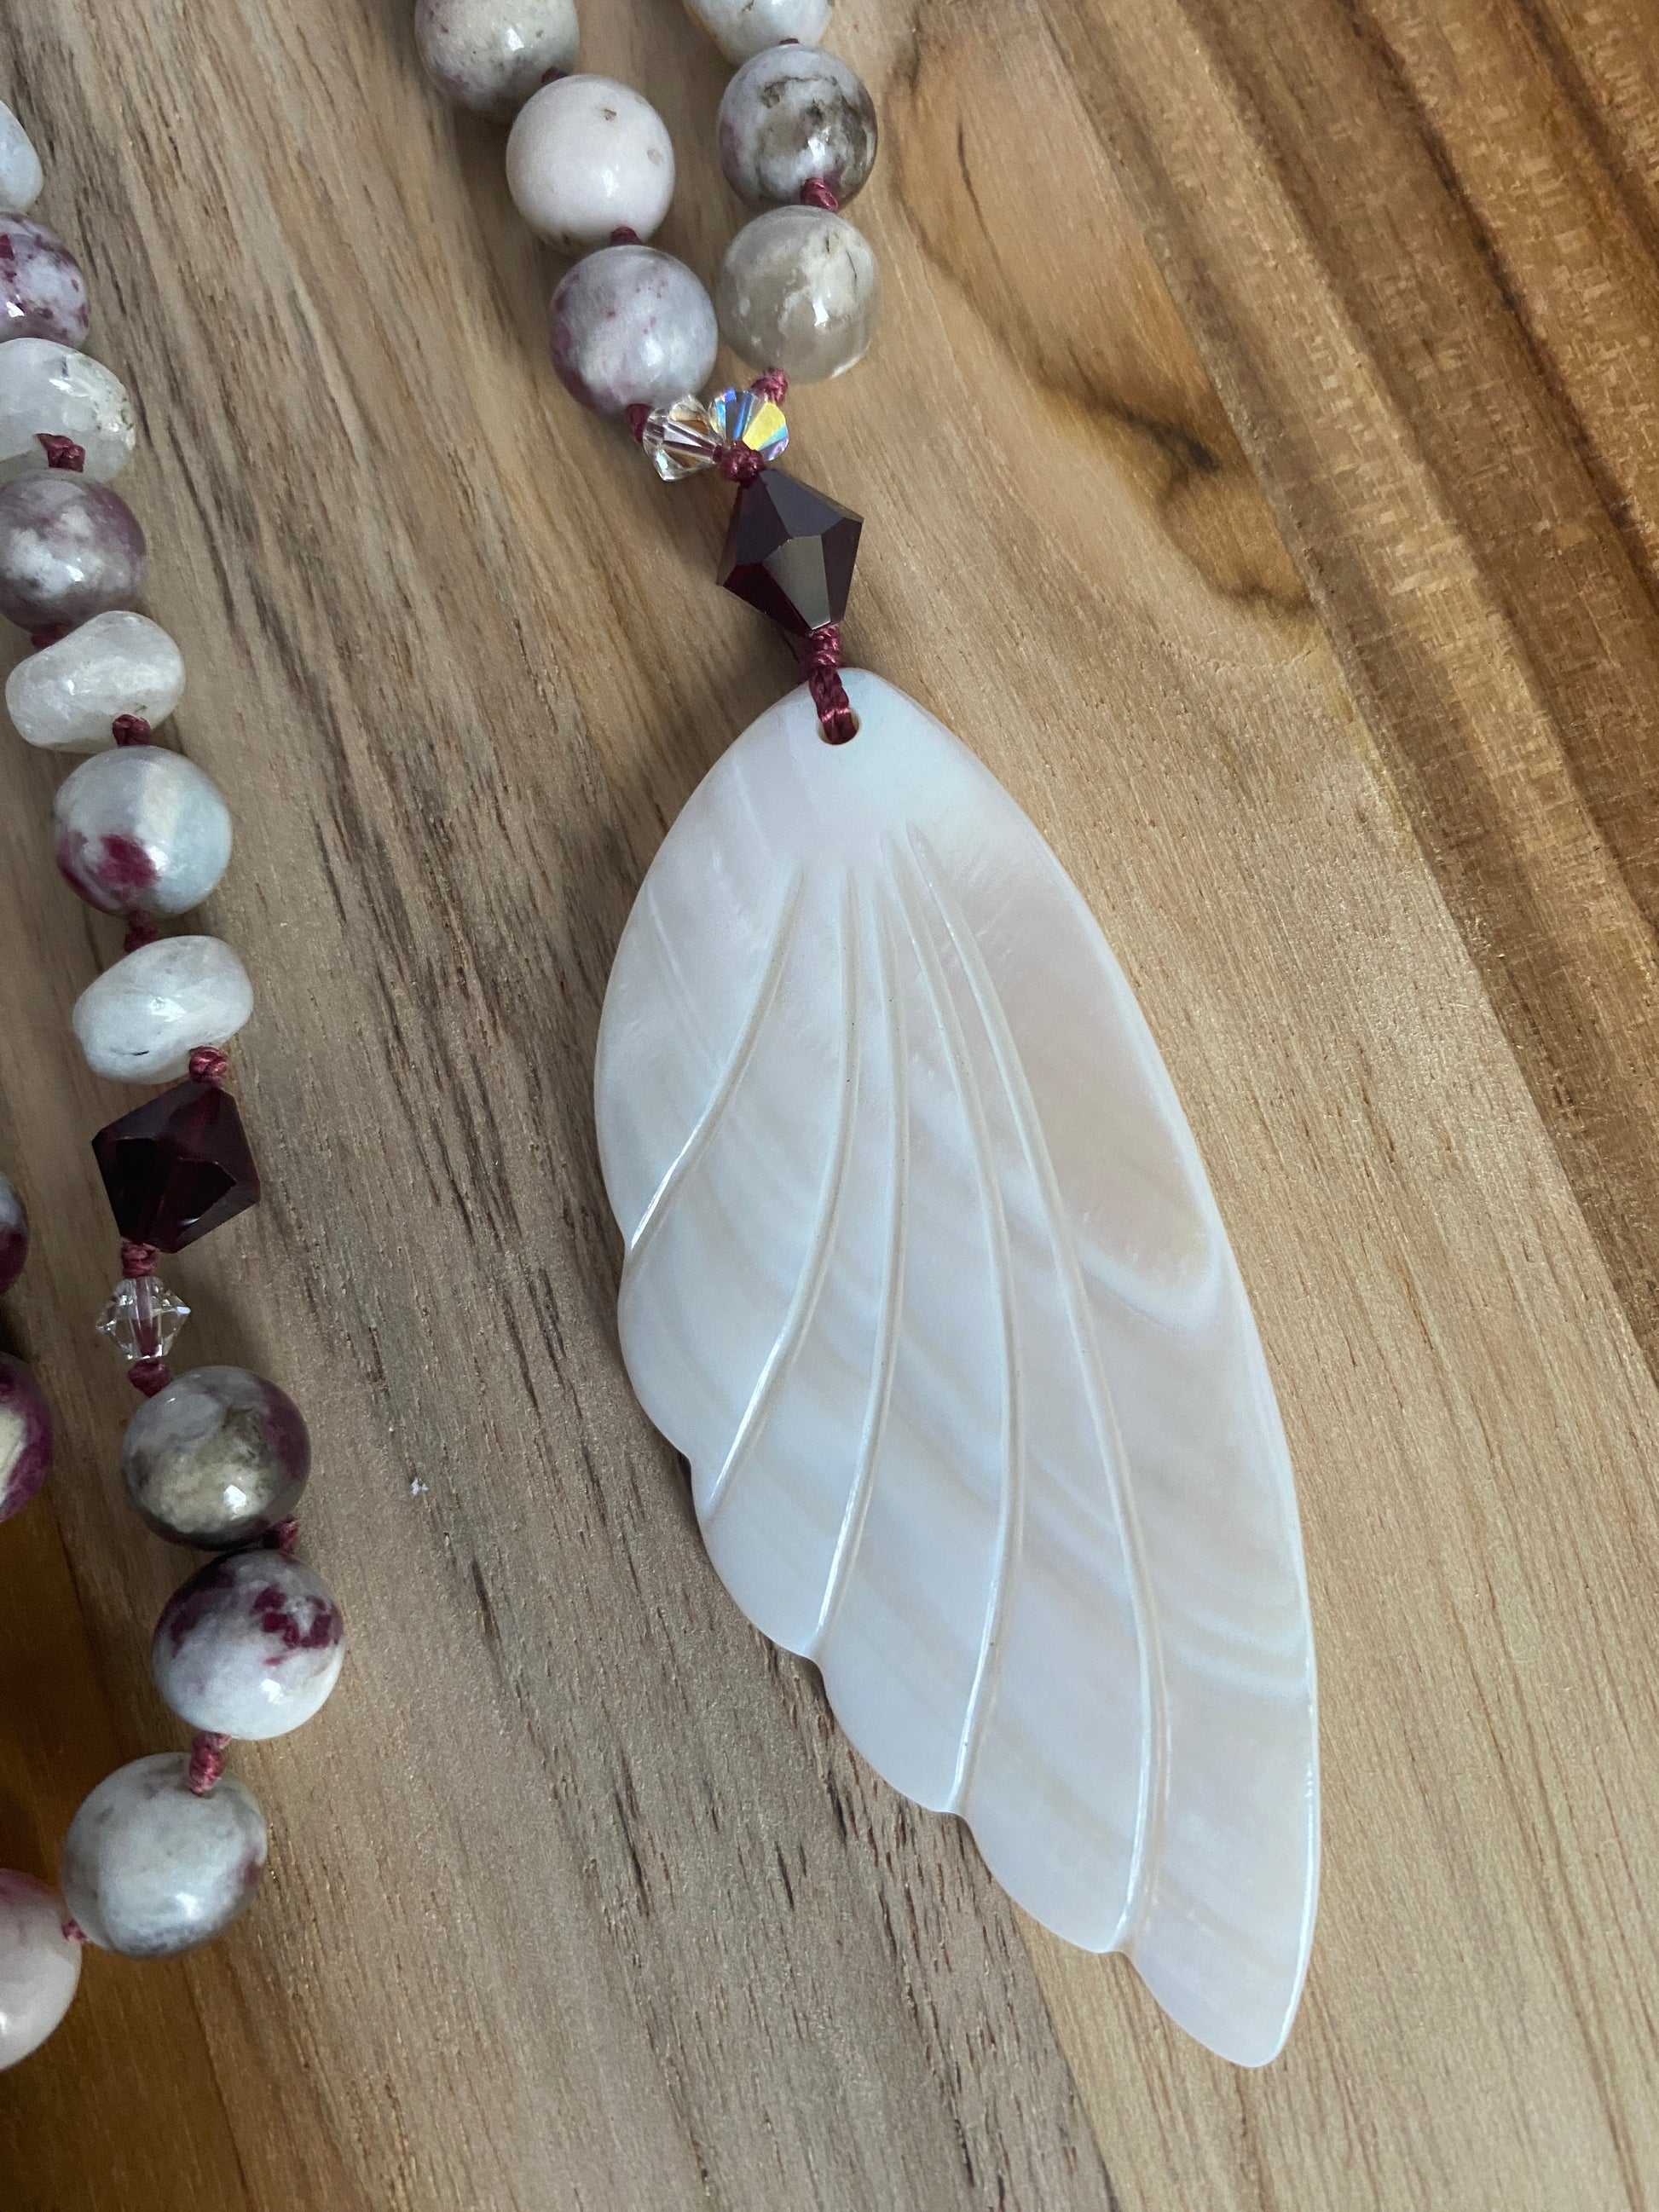 30" Long Mother of Pearl Wing Pendant Necklace with Tourmaline, Moonstone & Crystal Beads - My Urban Gems